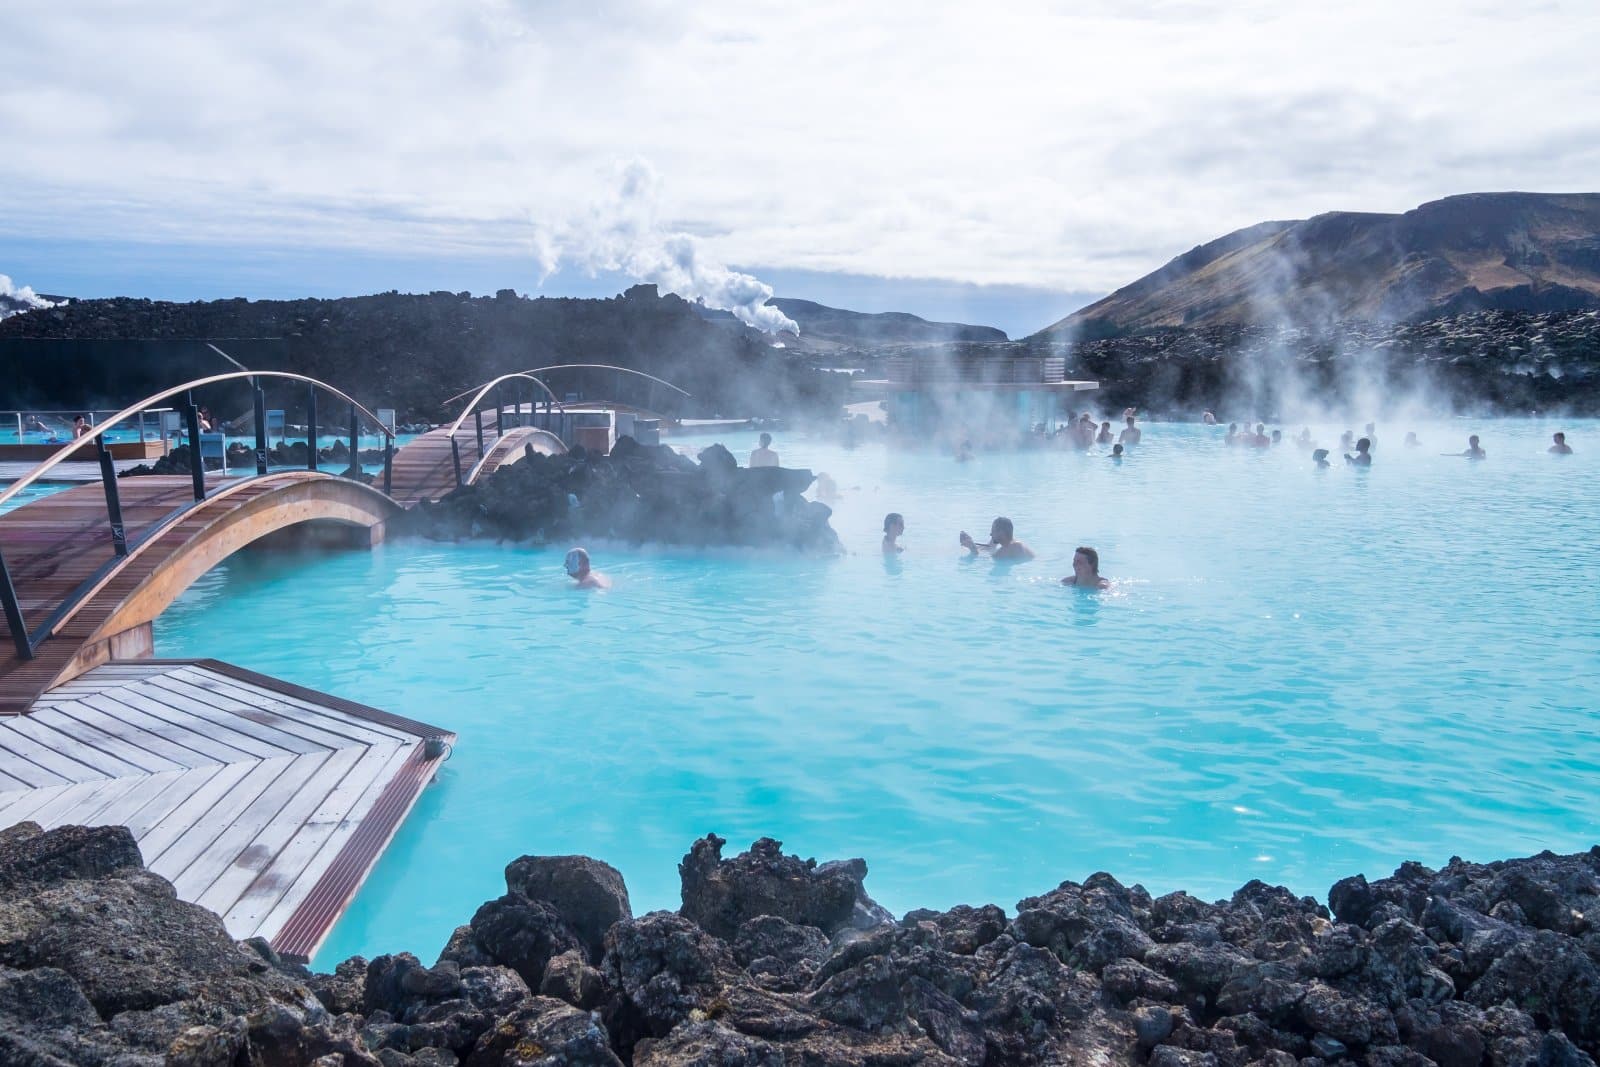 <p class="wp-caption-text">Image Credit: Shutterstock / Puripat Lertpunyaroj</p>  <p><span>The Mývatn Nature Baths, located in the north of Iceland, offer a more secluded alternative to the Blue Lagoon. These geothermal baths are set amidst a landscape of volcanic rock, providing a tranquil setting to relax and enjoy Iceland’s geothermal activity. Rich in minerals, the warm waters of the baths are both soothing and healing, offering a peaceful retreat in the heart of Iceland’s volcanic north.</span></p>